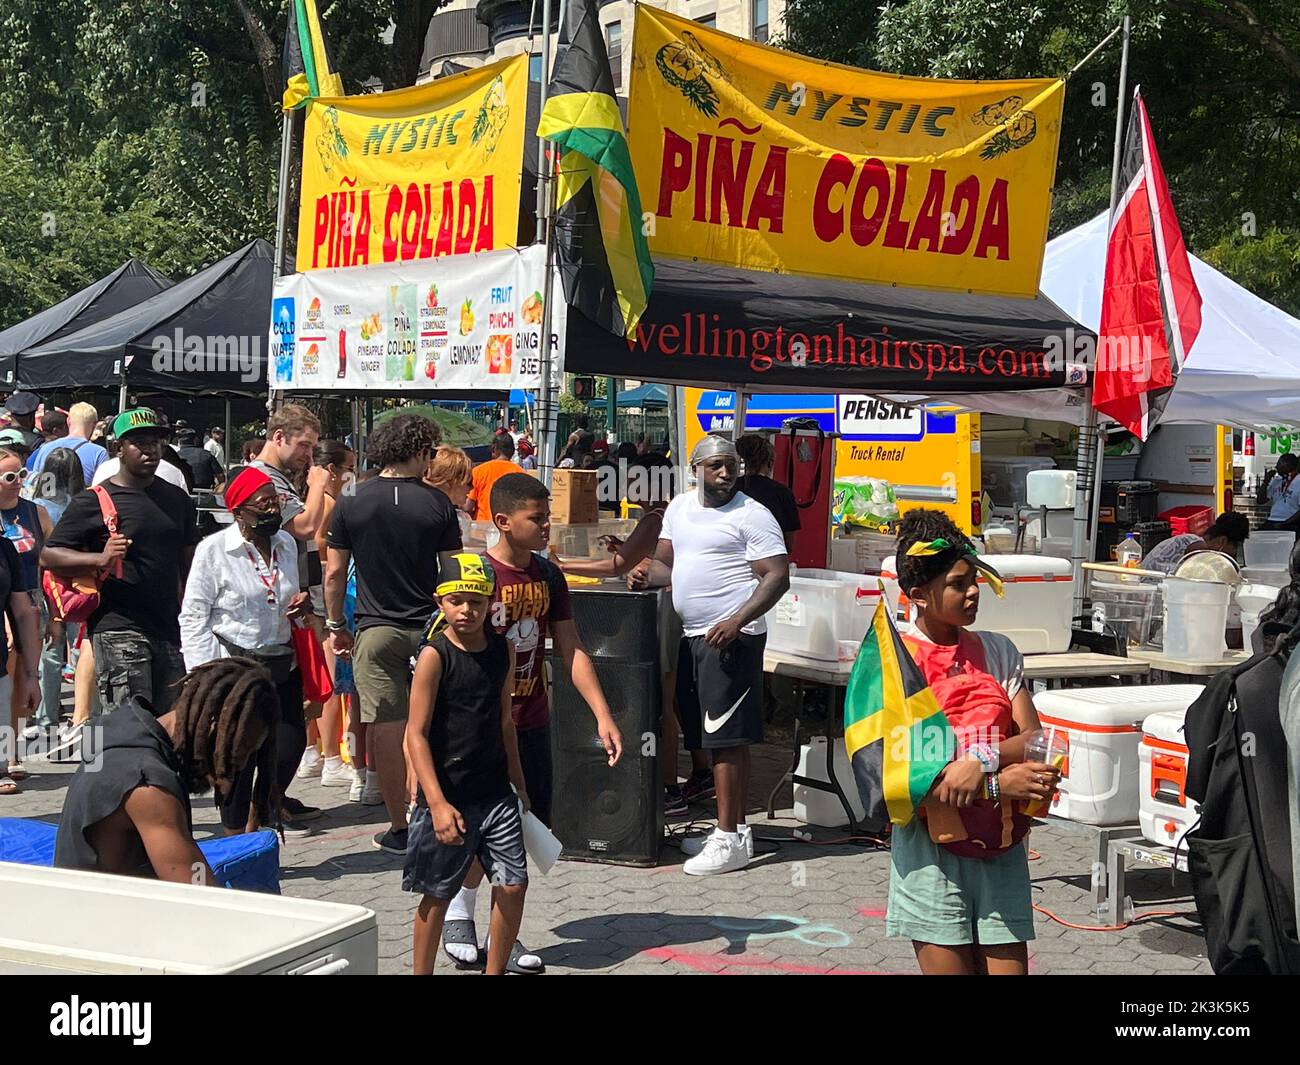 People cruise along the Eastern Parkway among the food vfendors at the annual West Indian Day Parade in Brooklyn New York. Stock Photo